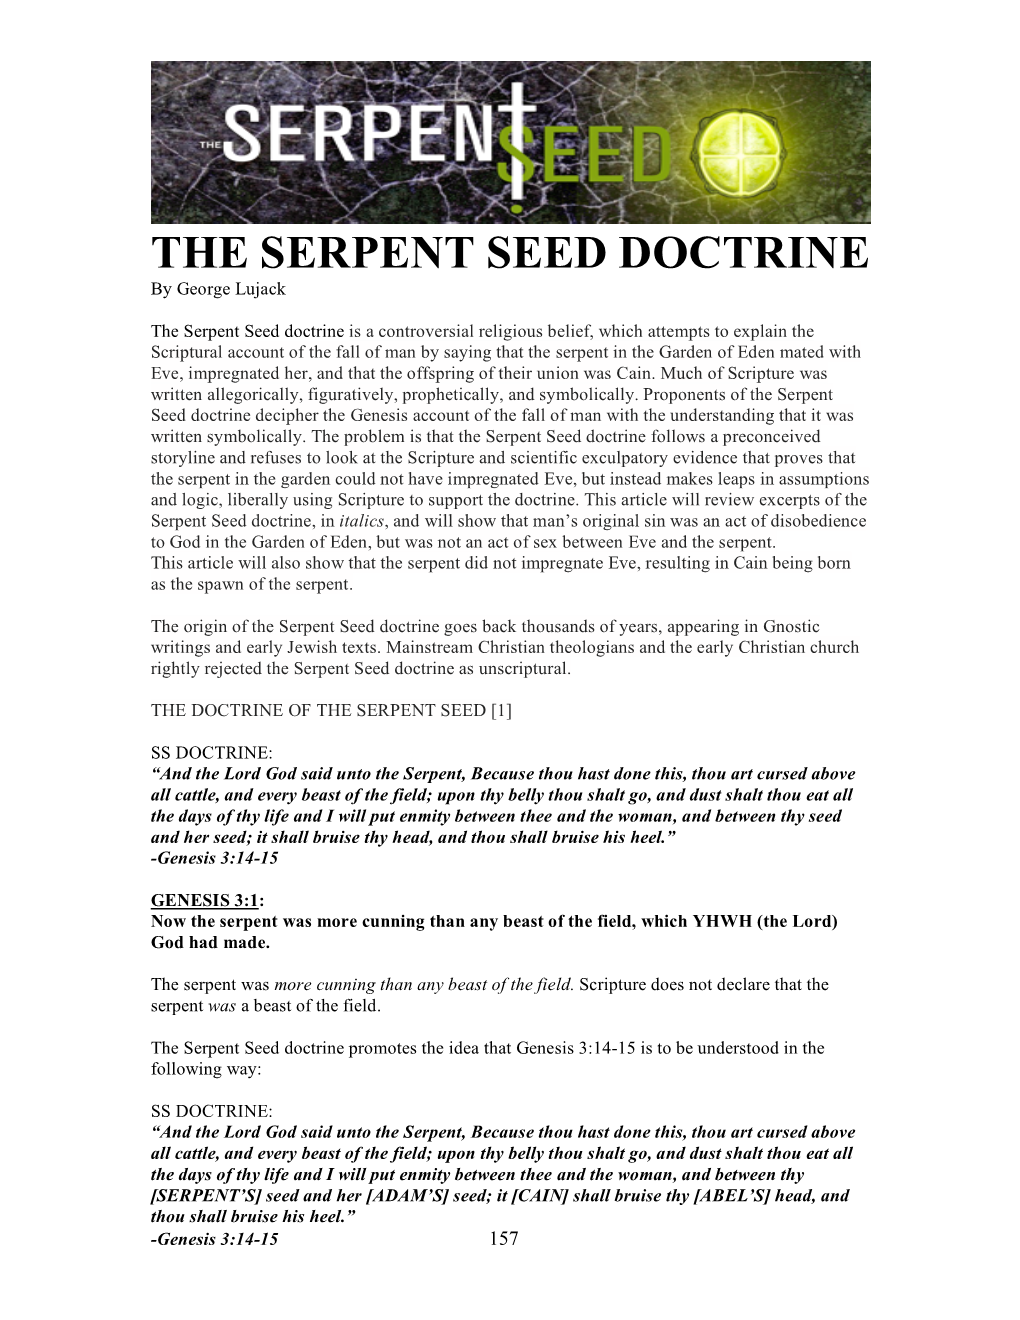 37. the Serpent Seed Doctrine